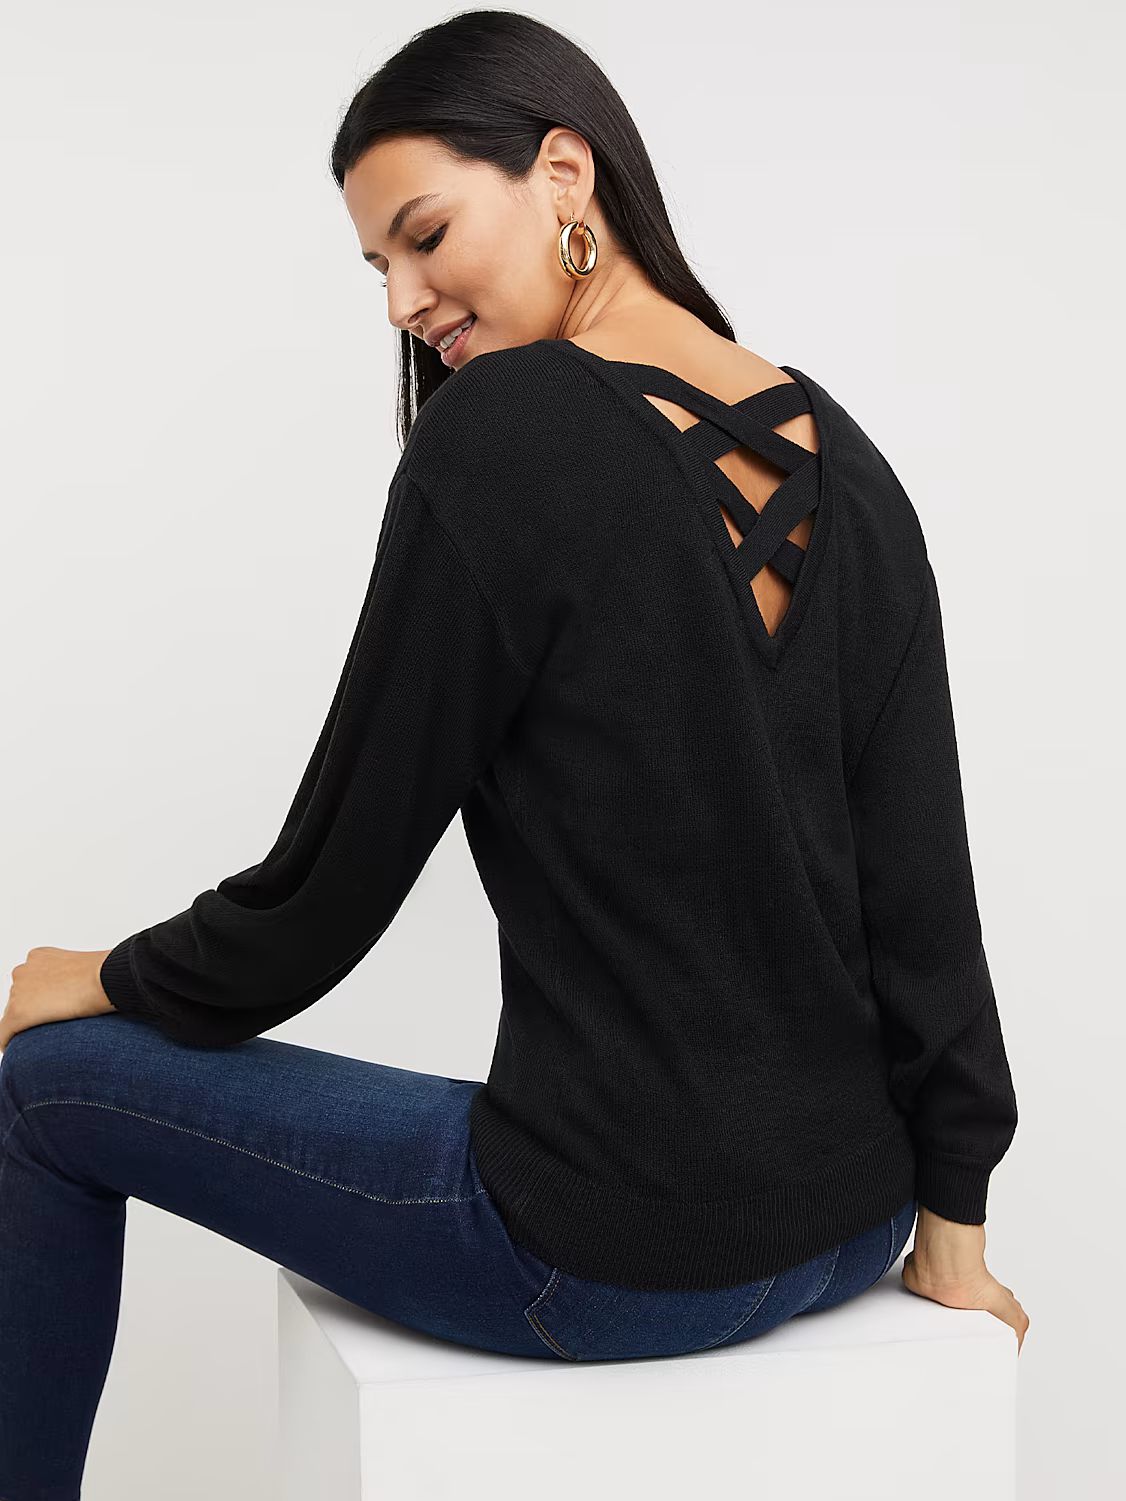 Lace-Back Pullover Sweater - New York & Company | New York & Company